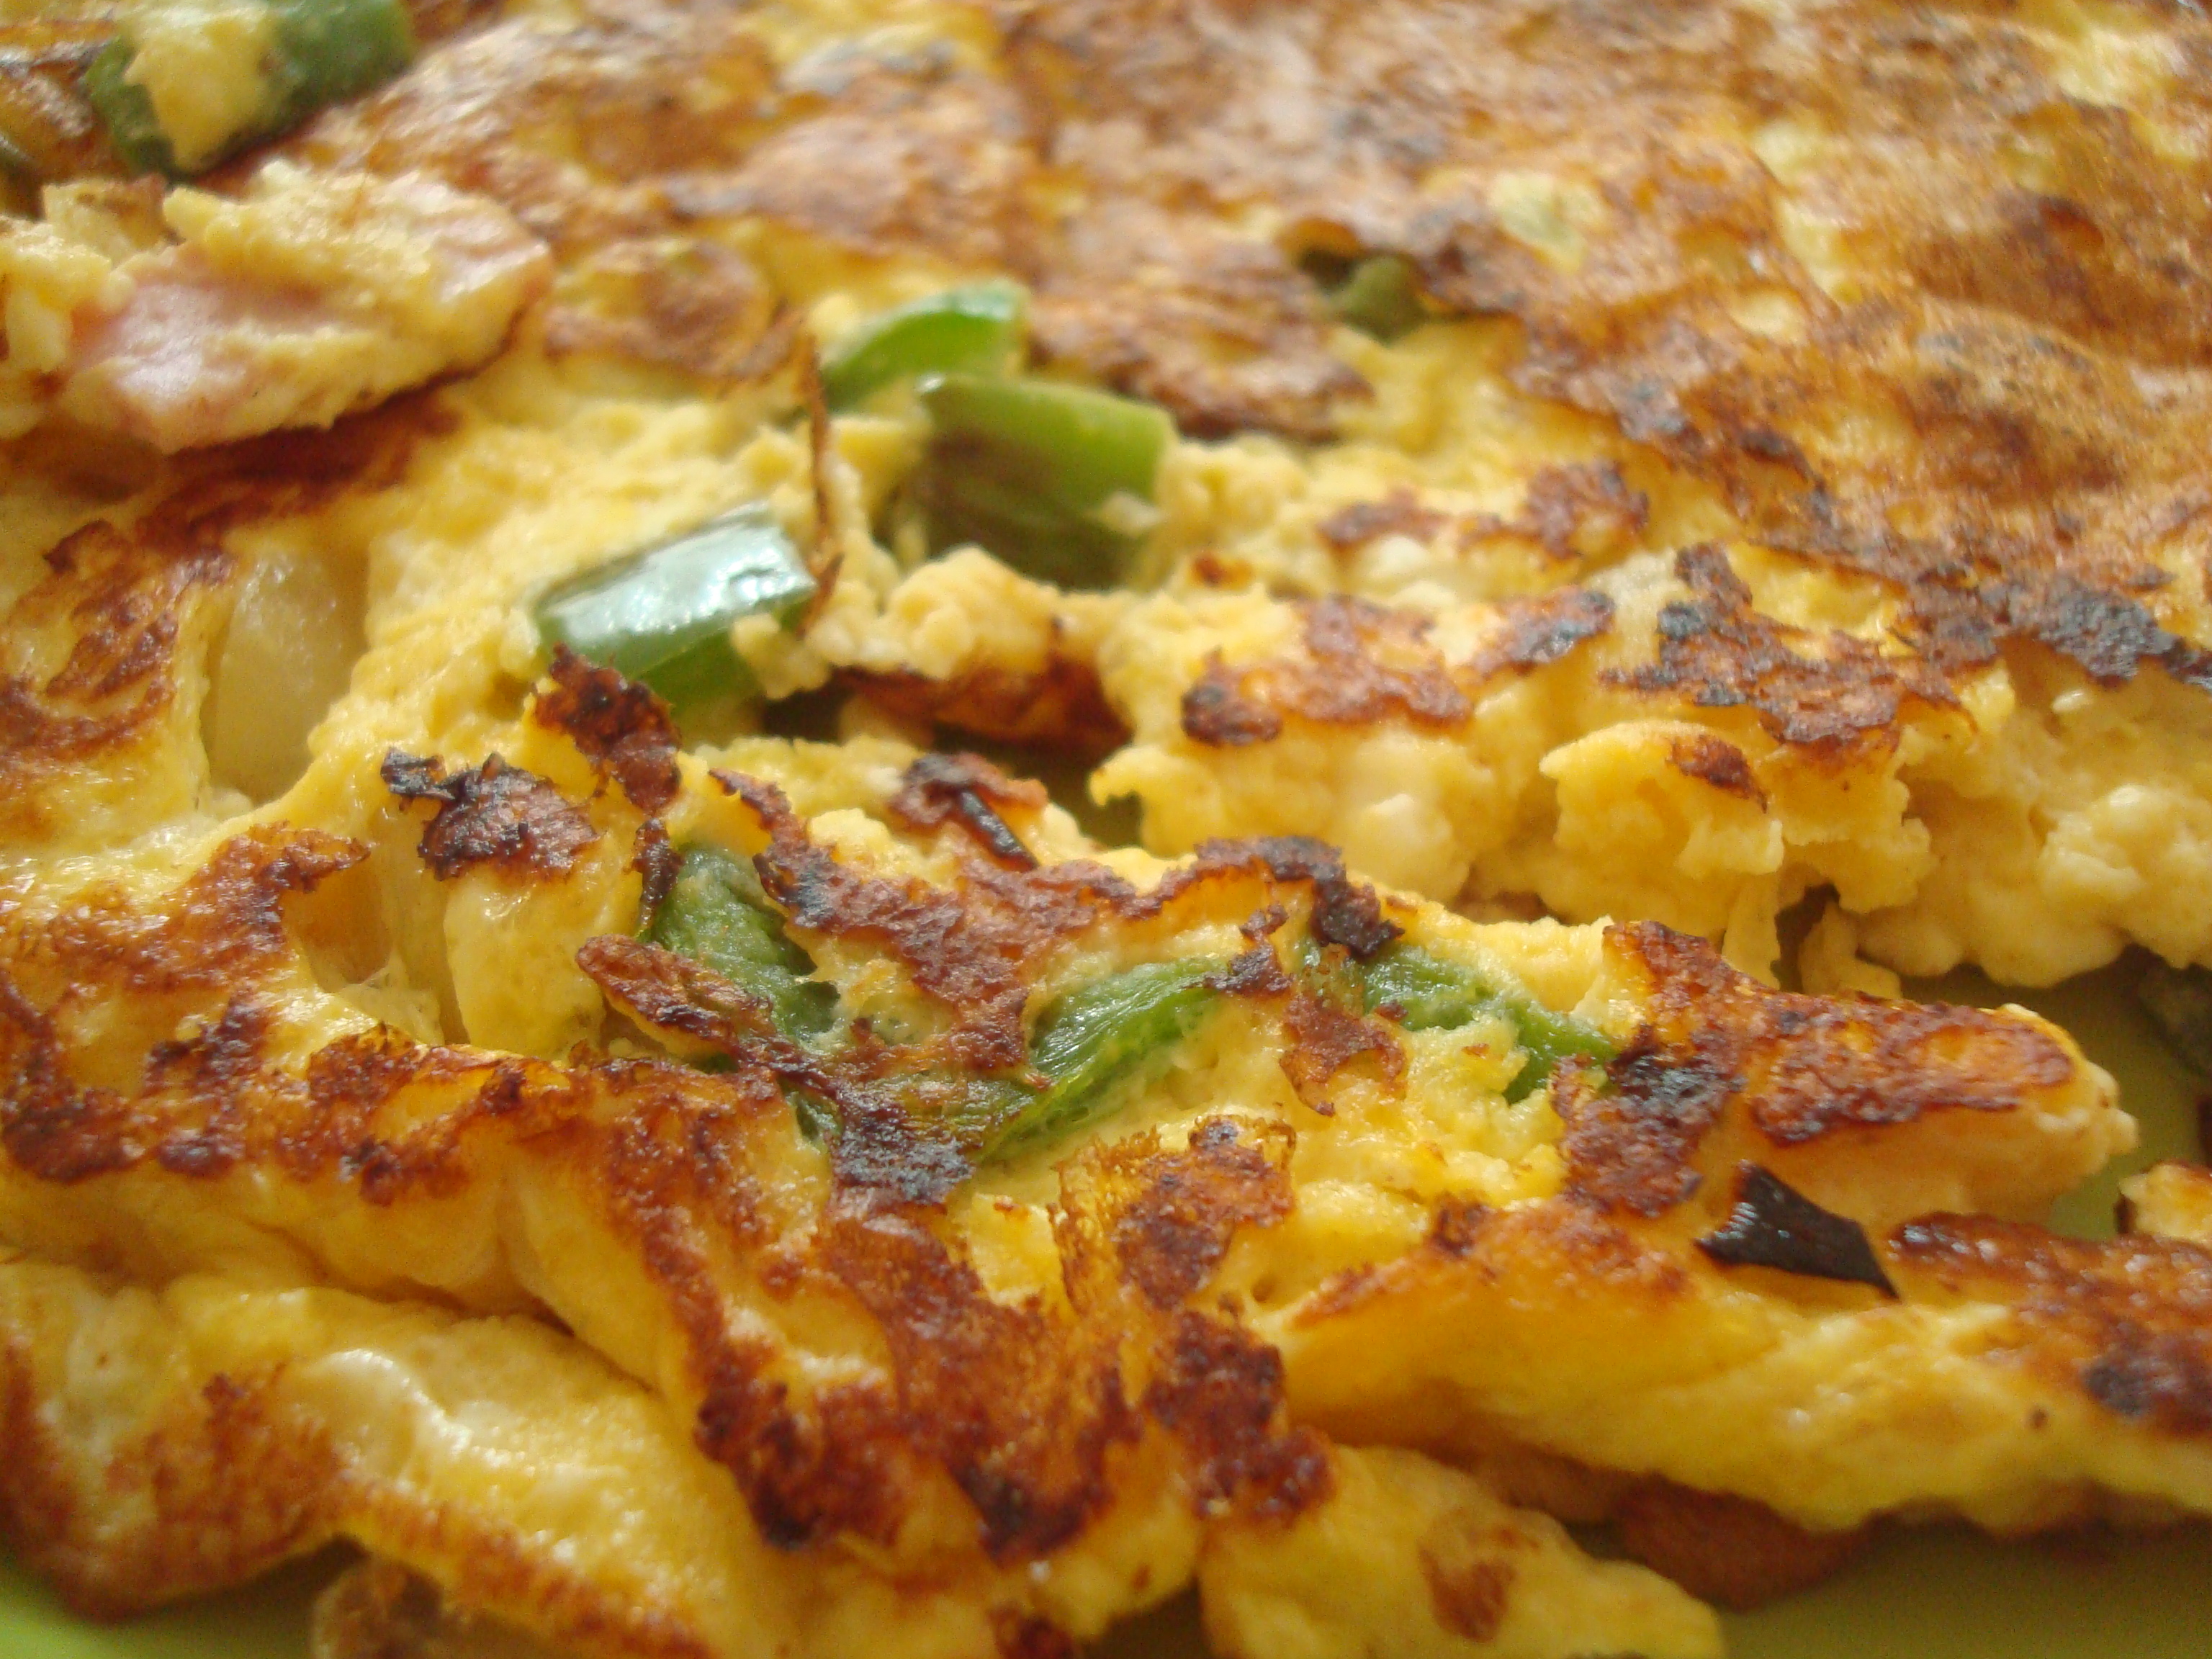 Home made omelette photo